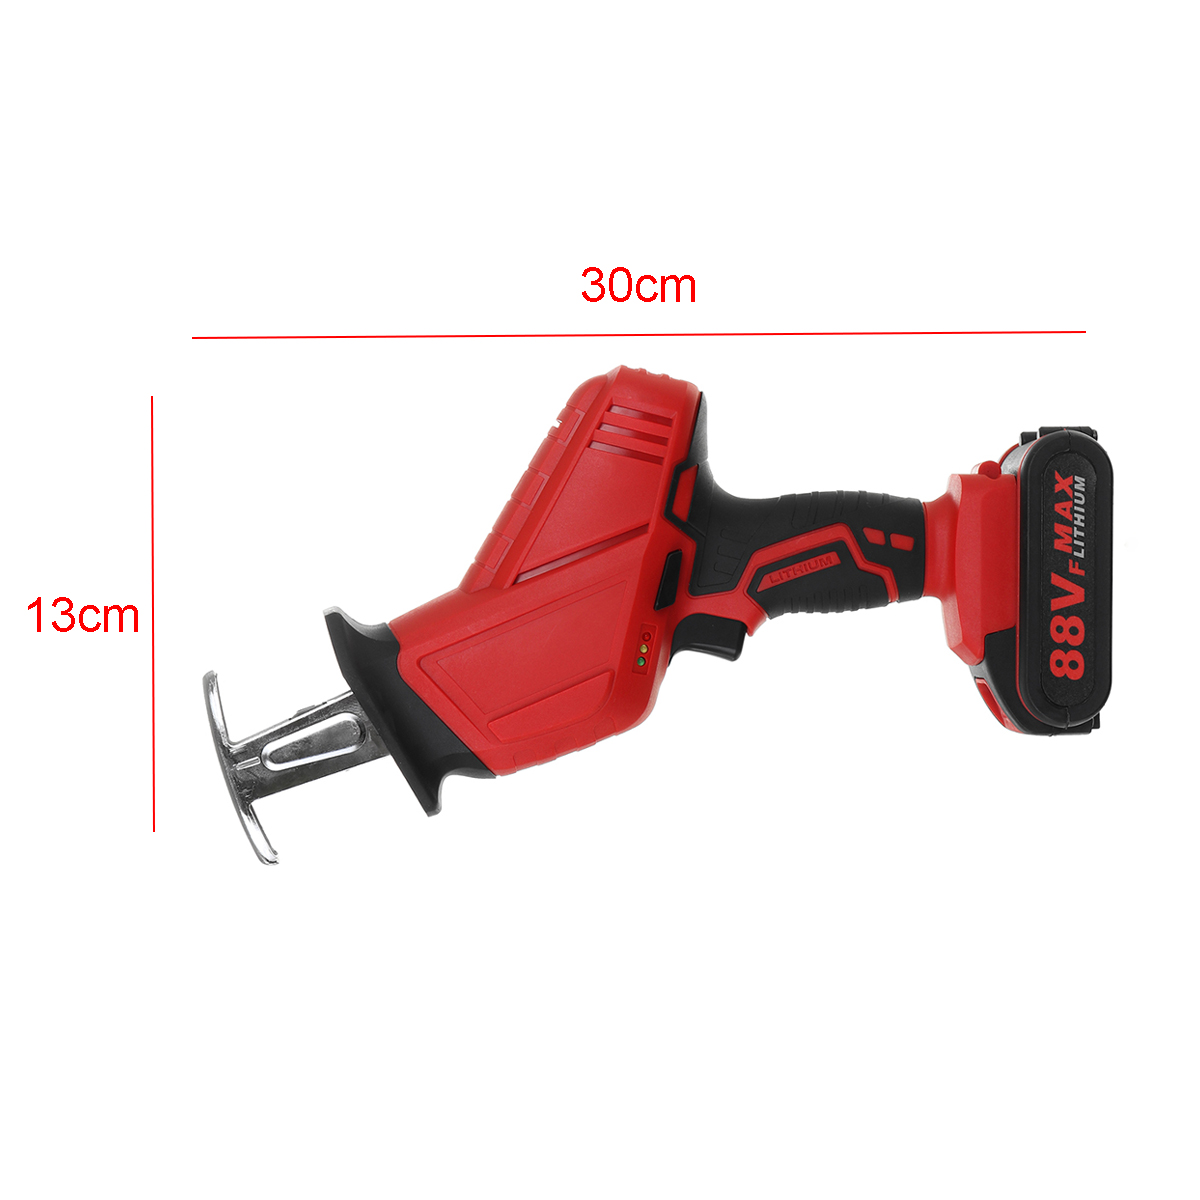 21V-88VF-Electric-Saw-Cordless-Charging-Reciprocating-Saw-Kit-LED-Light-2-Battery-Wood-Cutter-Set-1670502-2